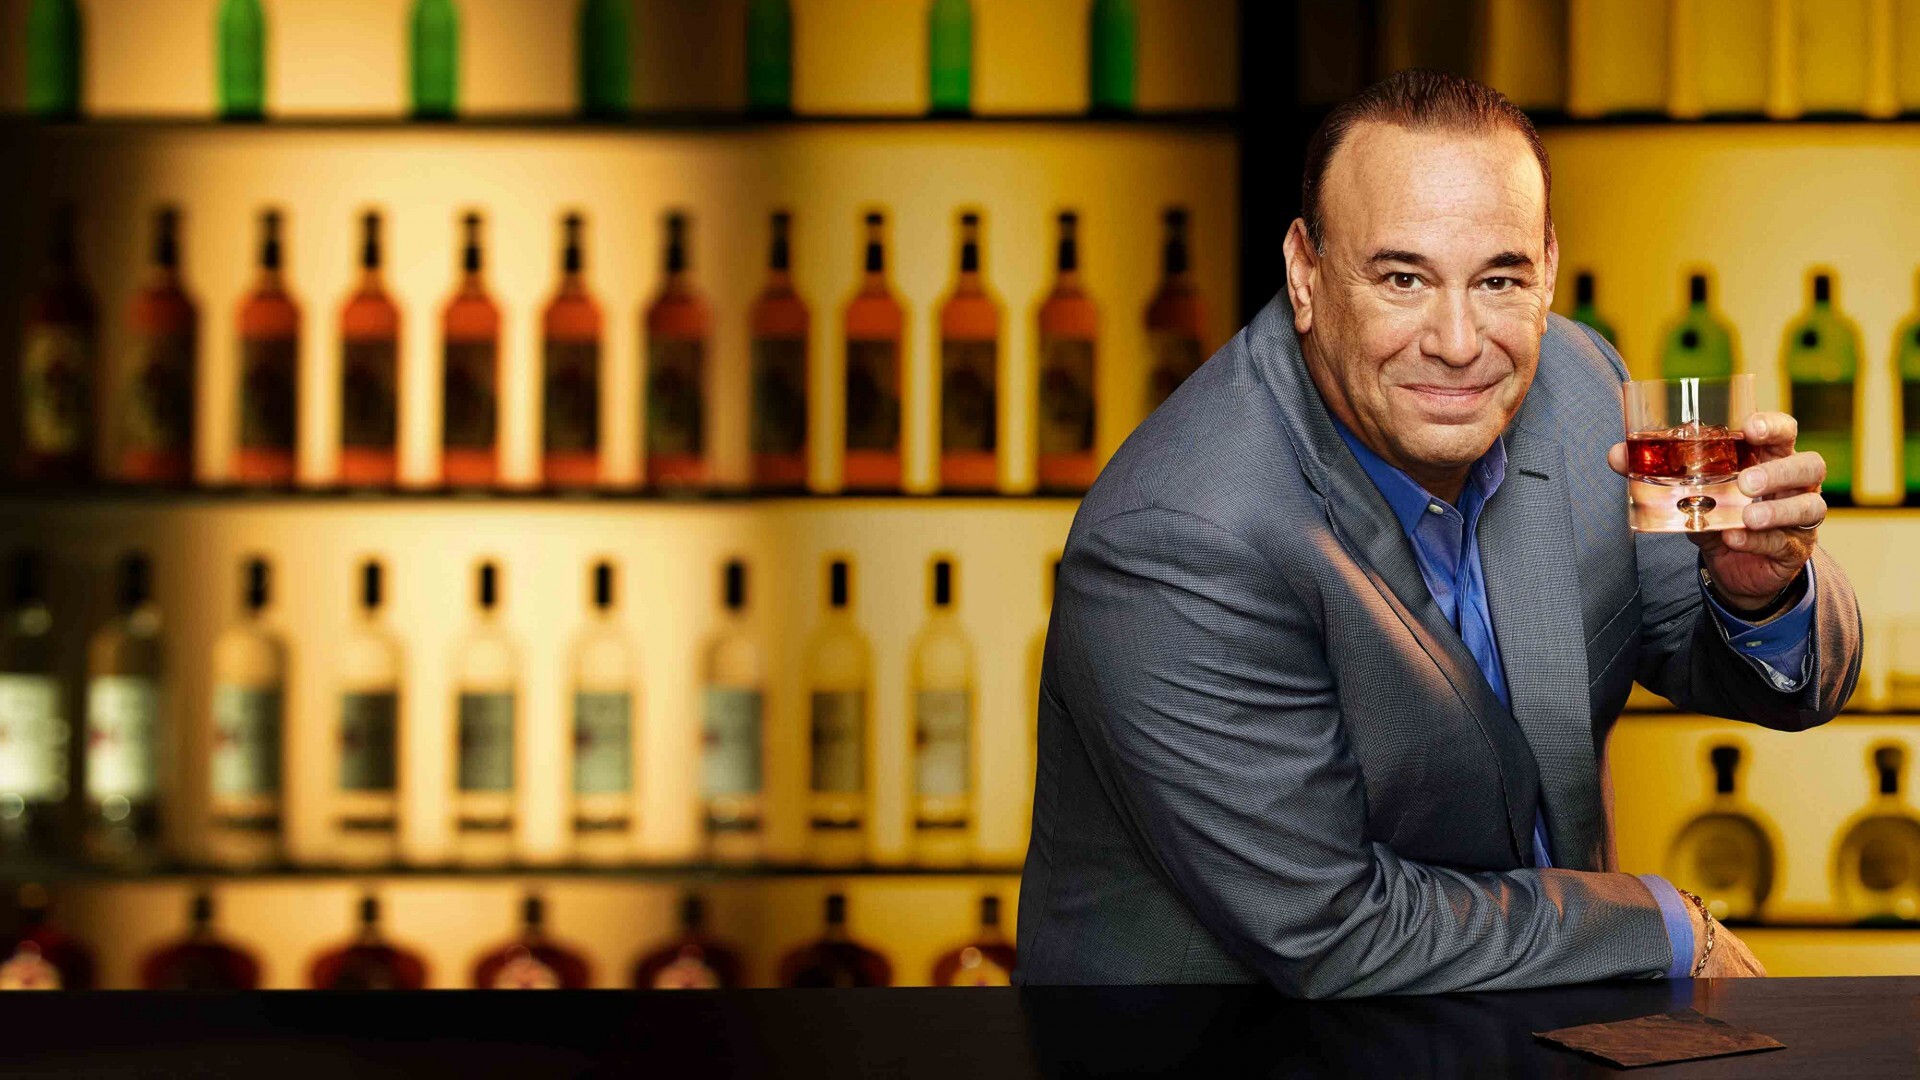 bar rescue contact information